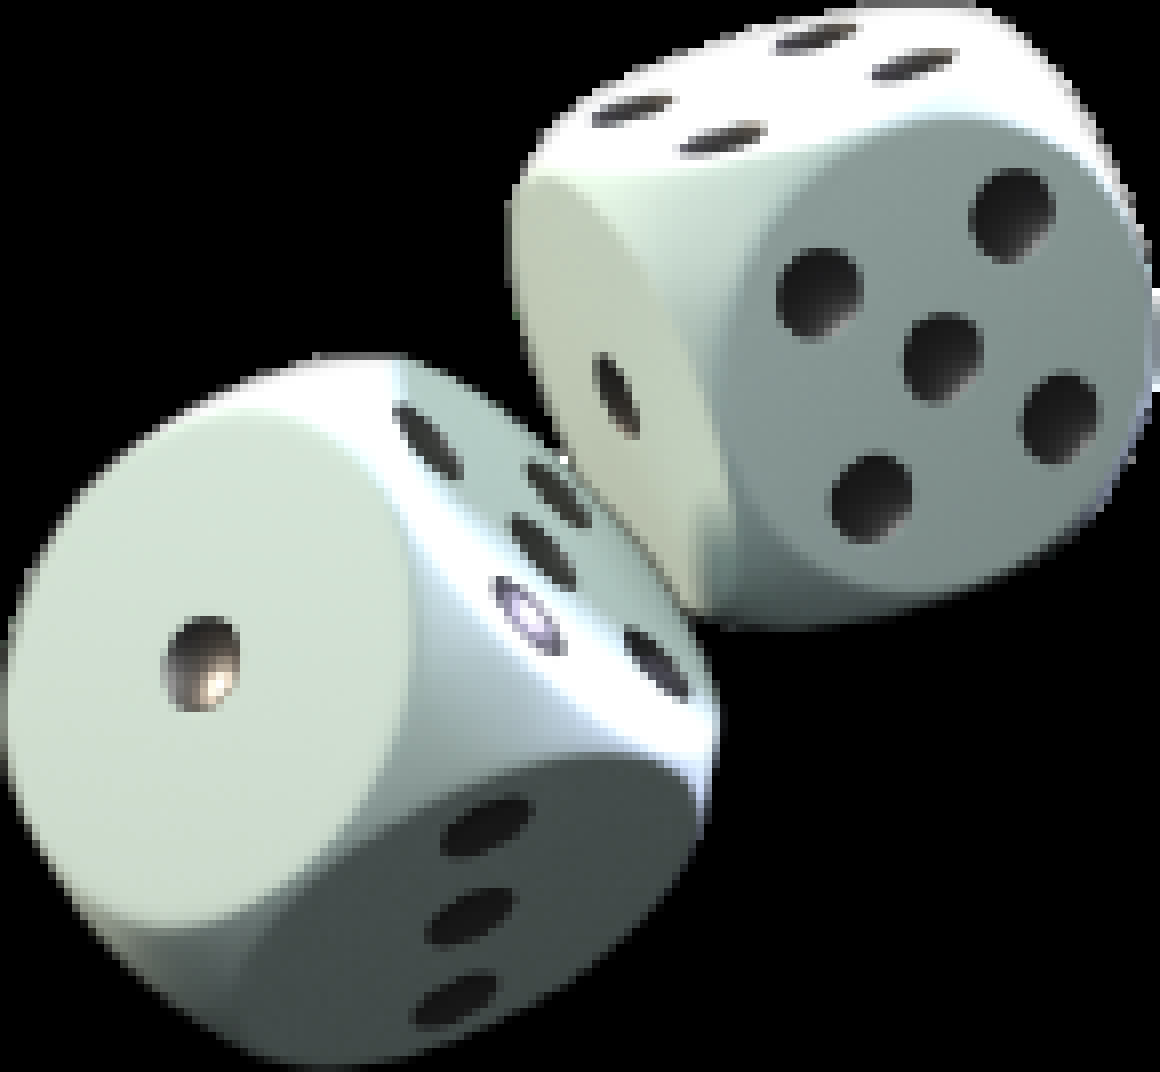 playing dice image after